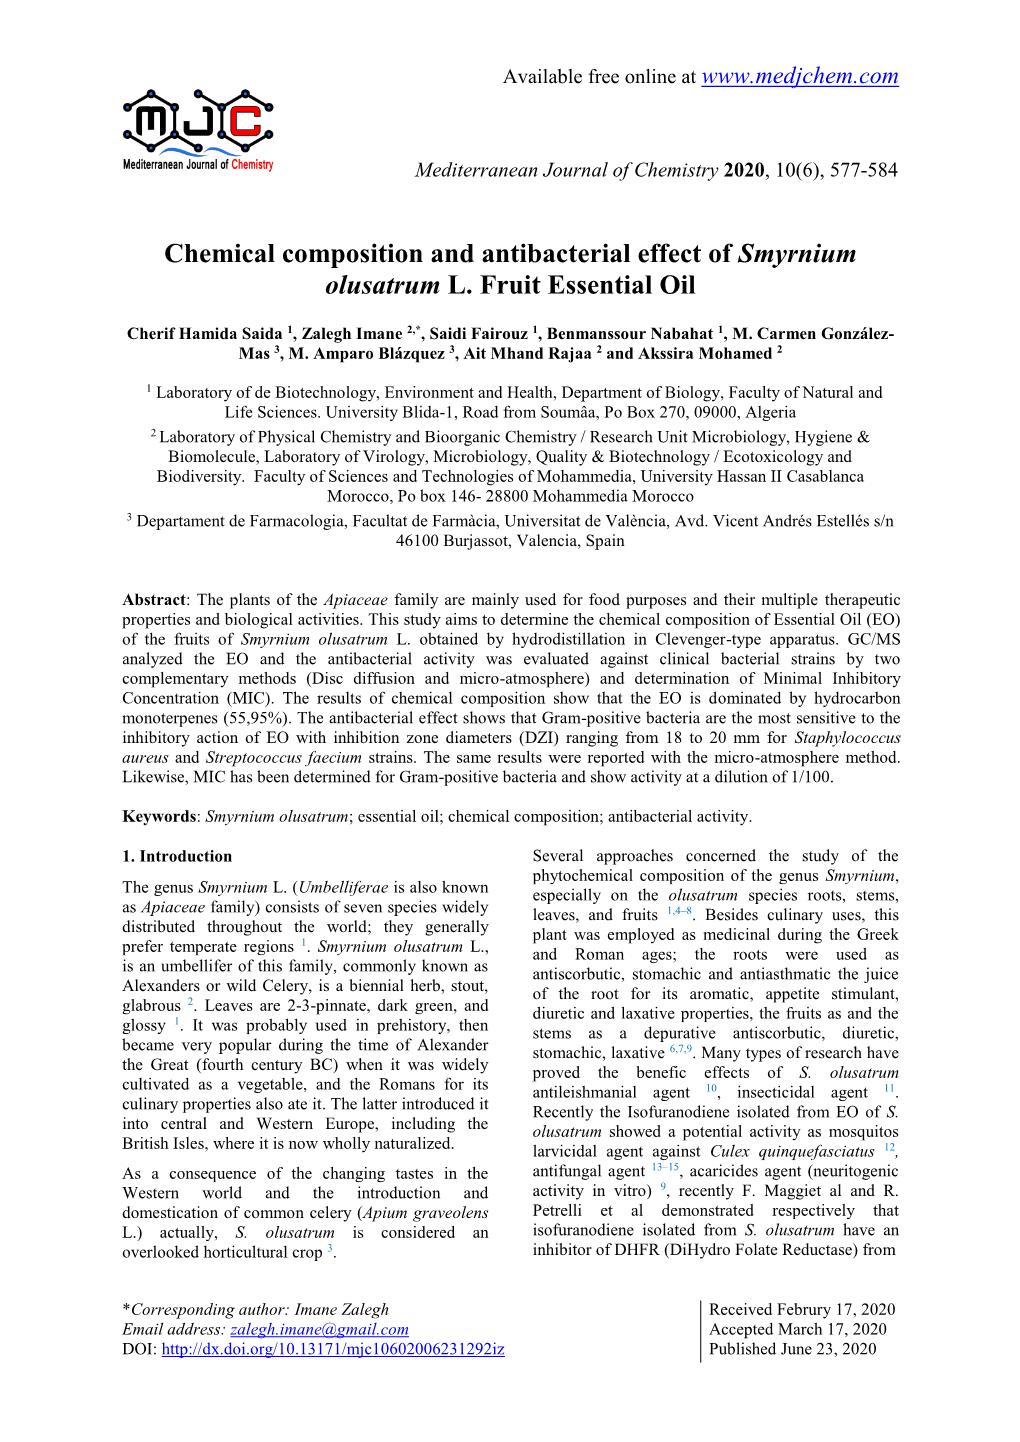 Chemical Composition and Antibacterial Effect of Smyrnium Olusatrum L